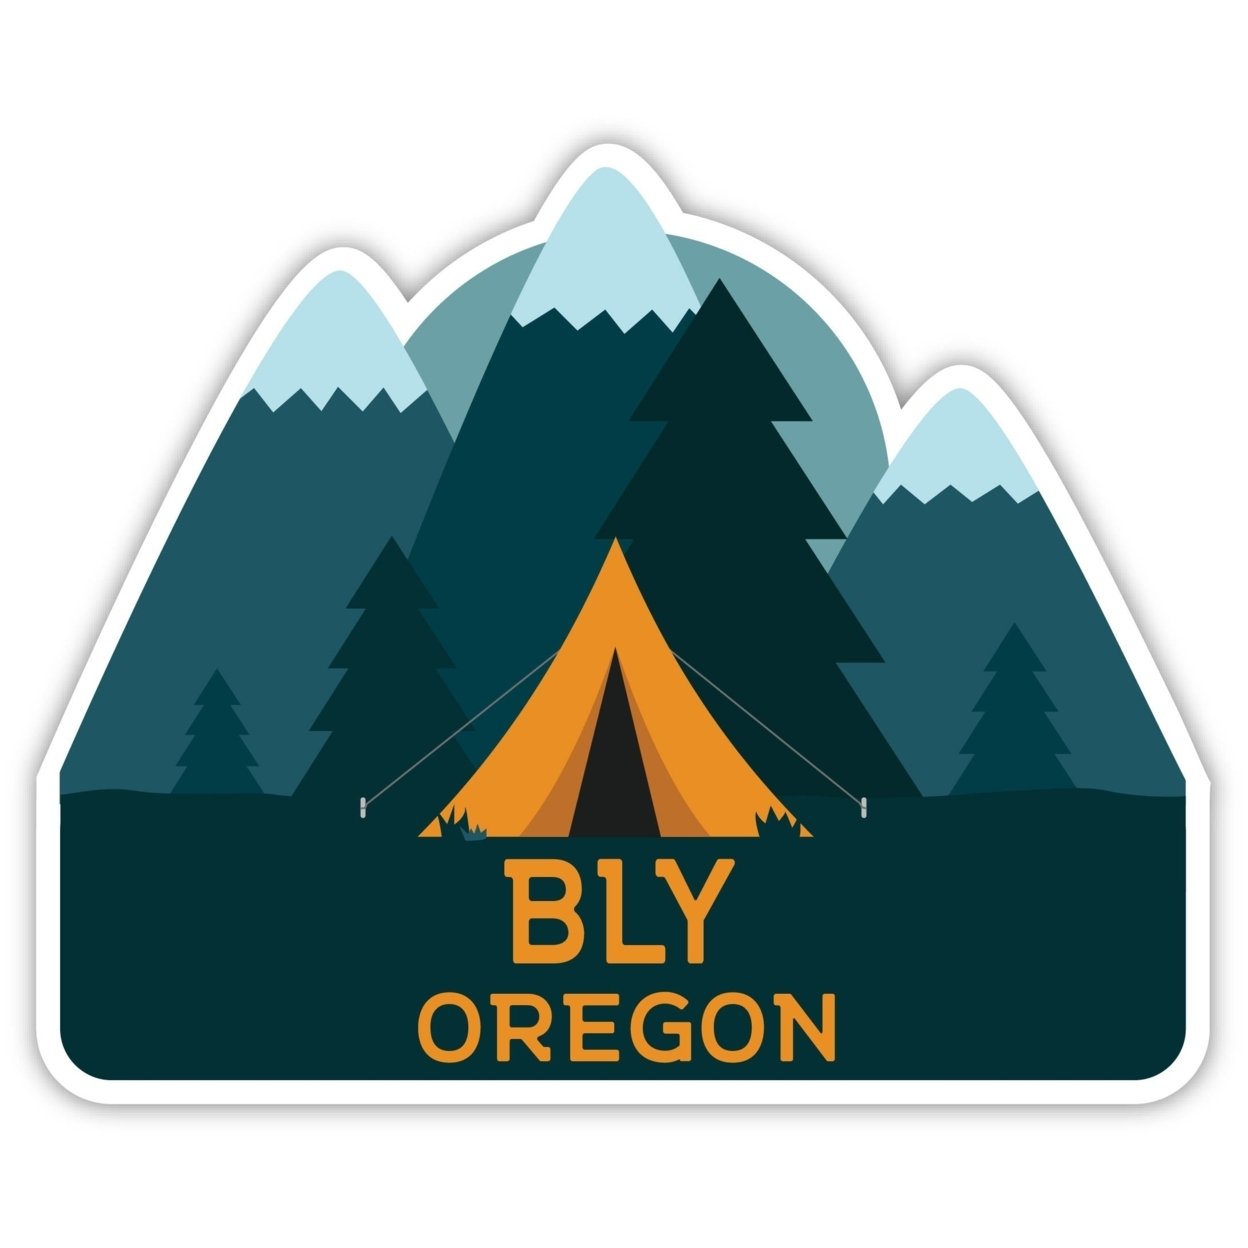 Bly Oregon Souvenir Decorative Stickers (Choose Theme And Size) - 4-Pack, 4-Inch, Tent